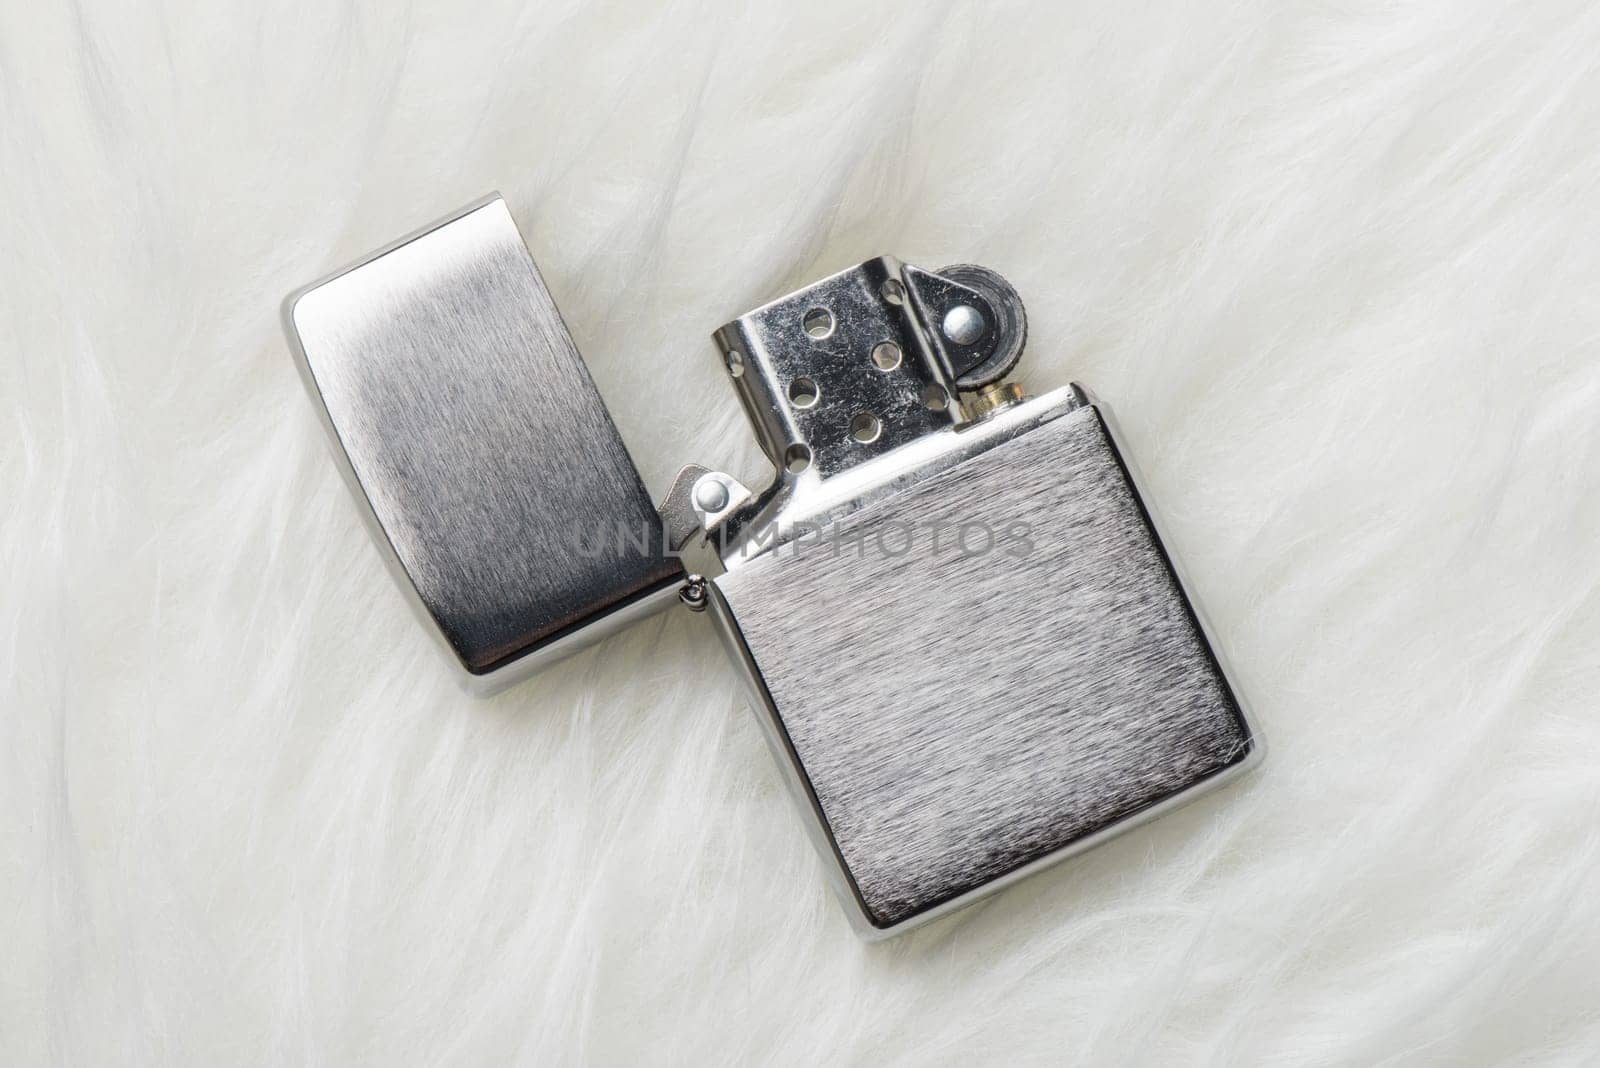 brushed chrome lighter with windproof isolated over white fur.